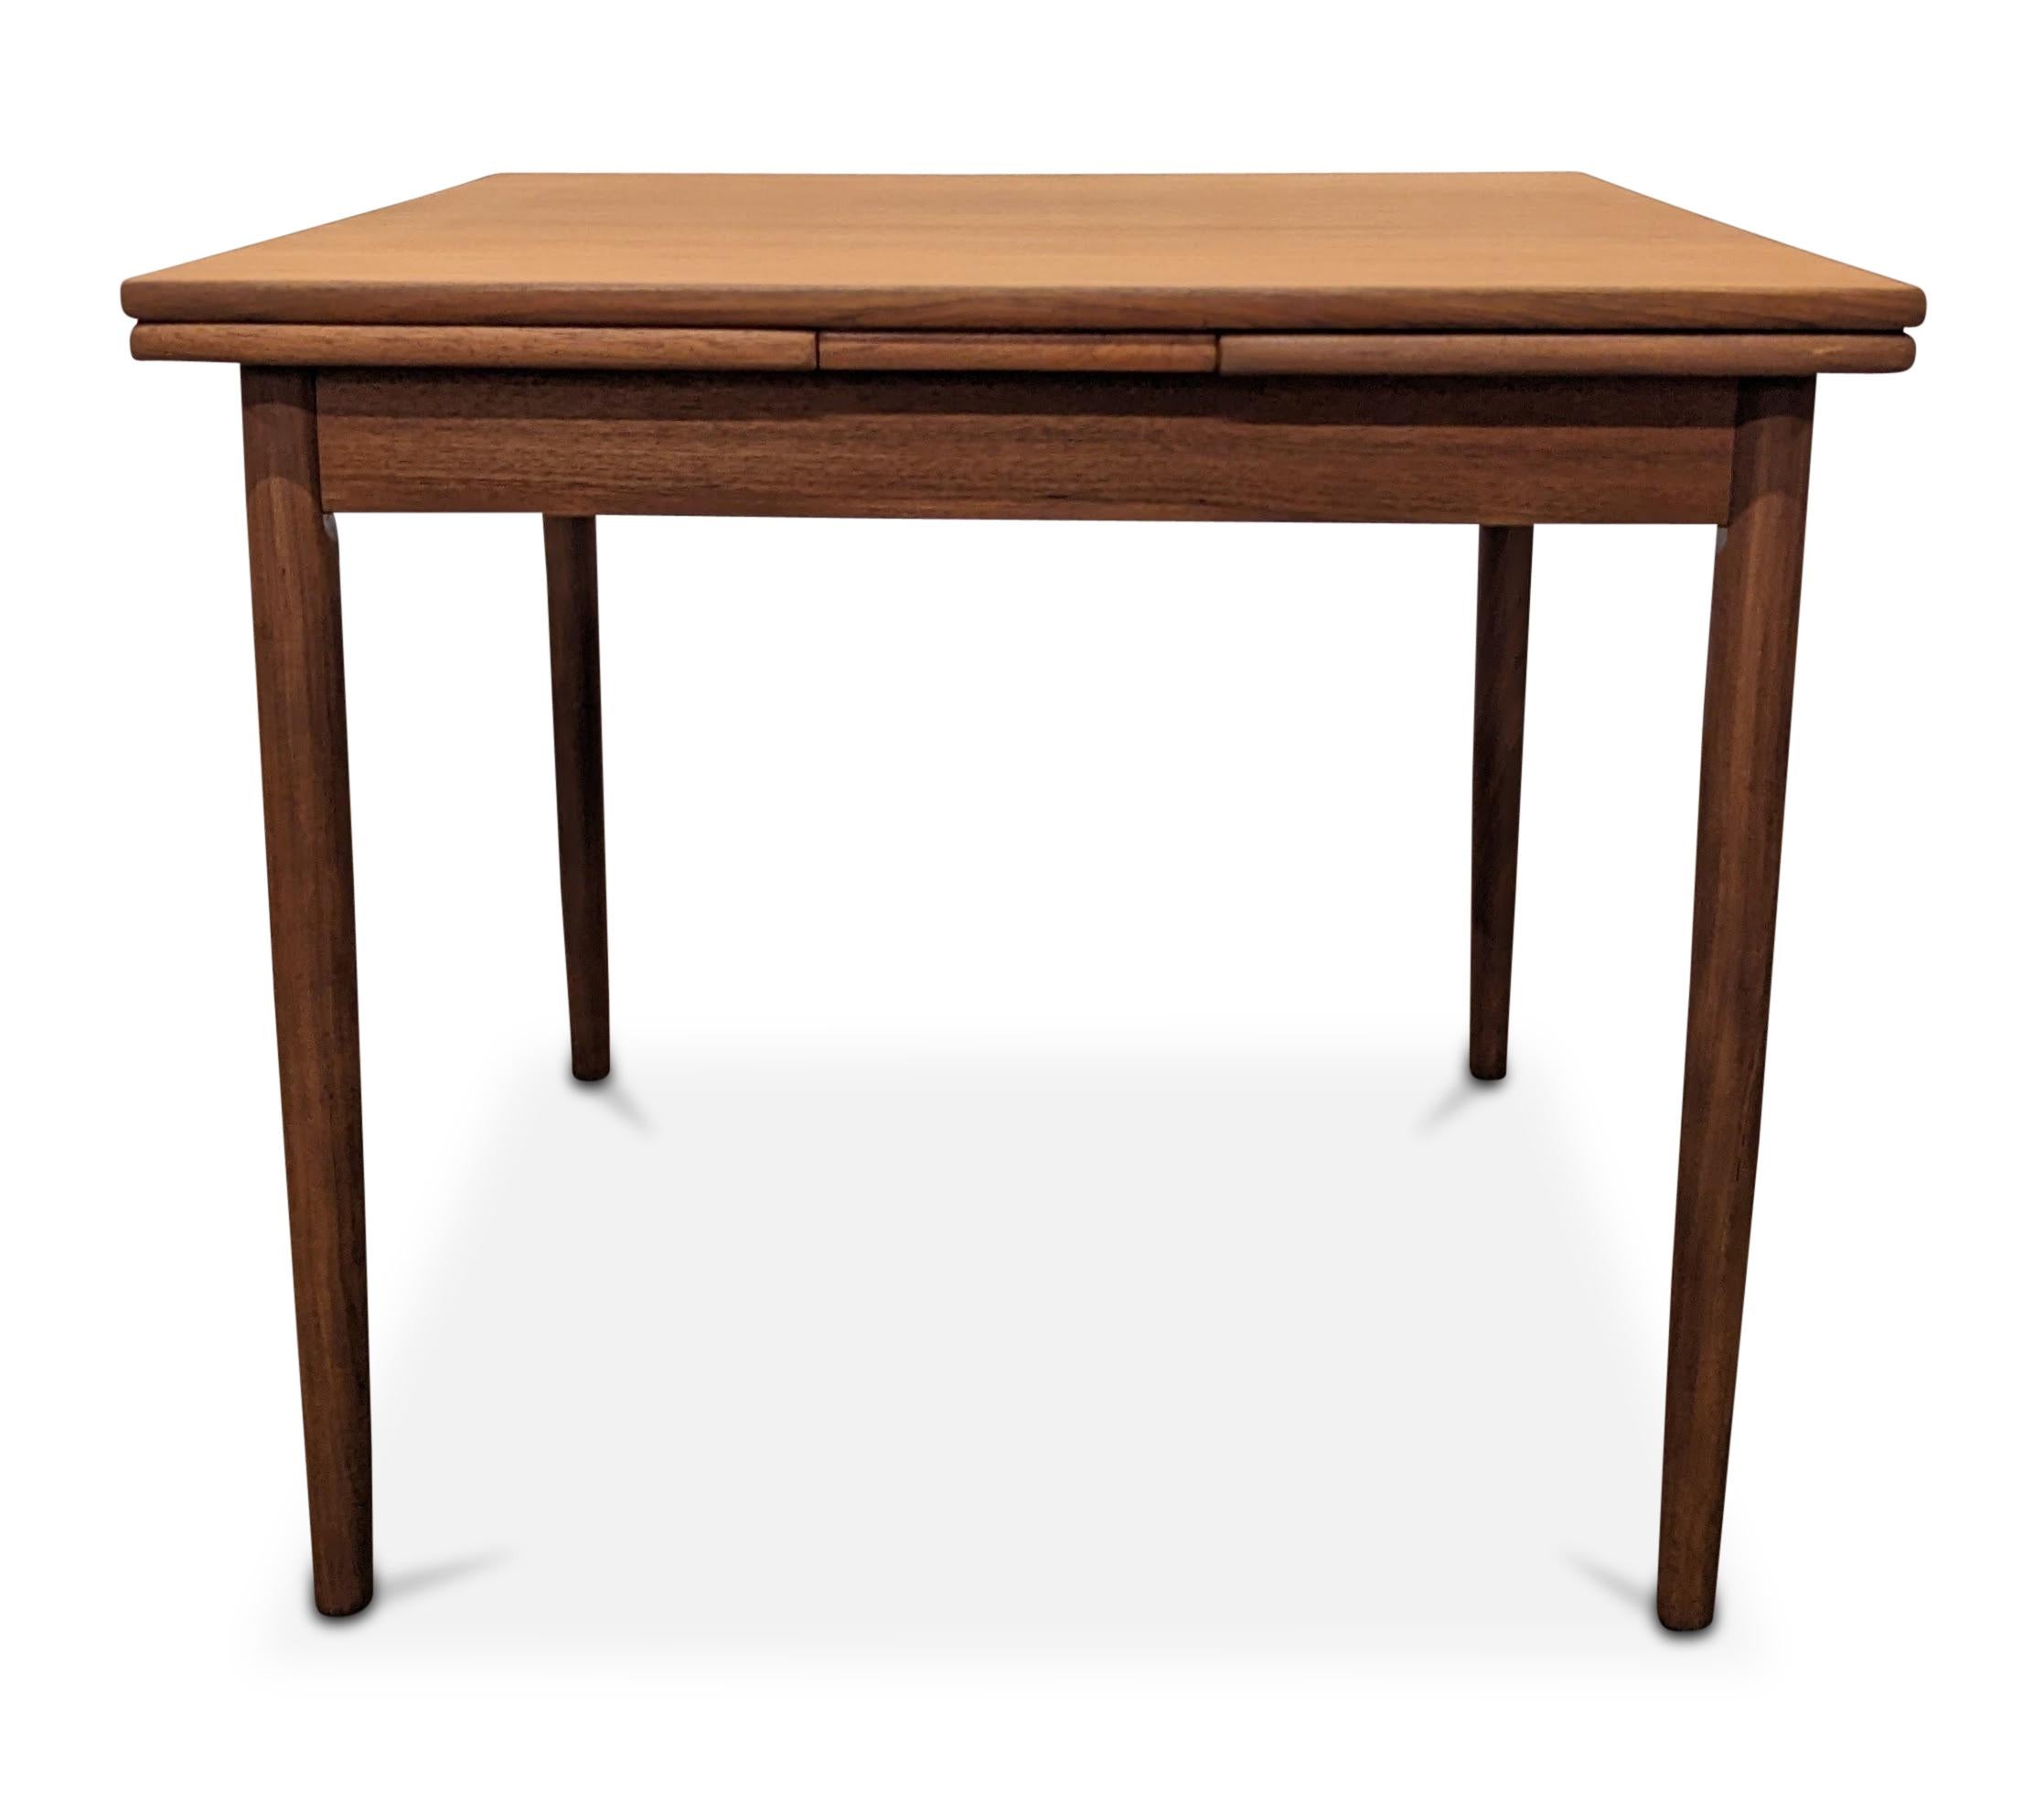 Has a small discoloration on one leaf

Dining table with two hidden leaves you pull out from under the top

Dimensions 28.5 